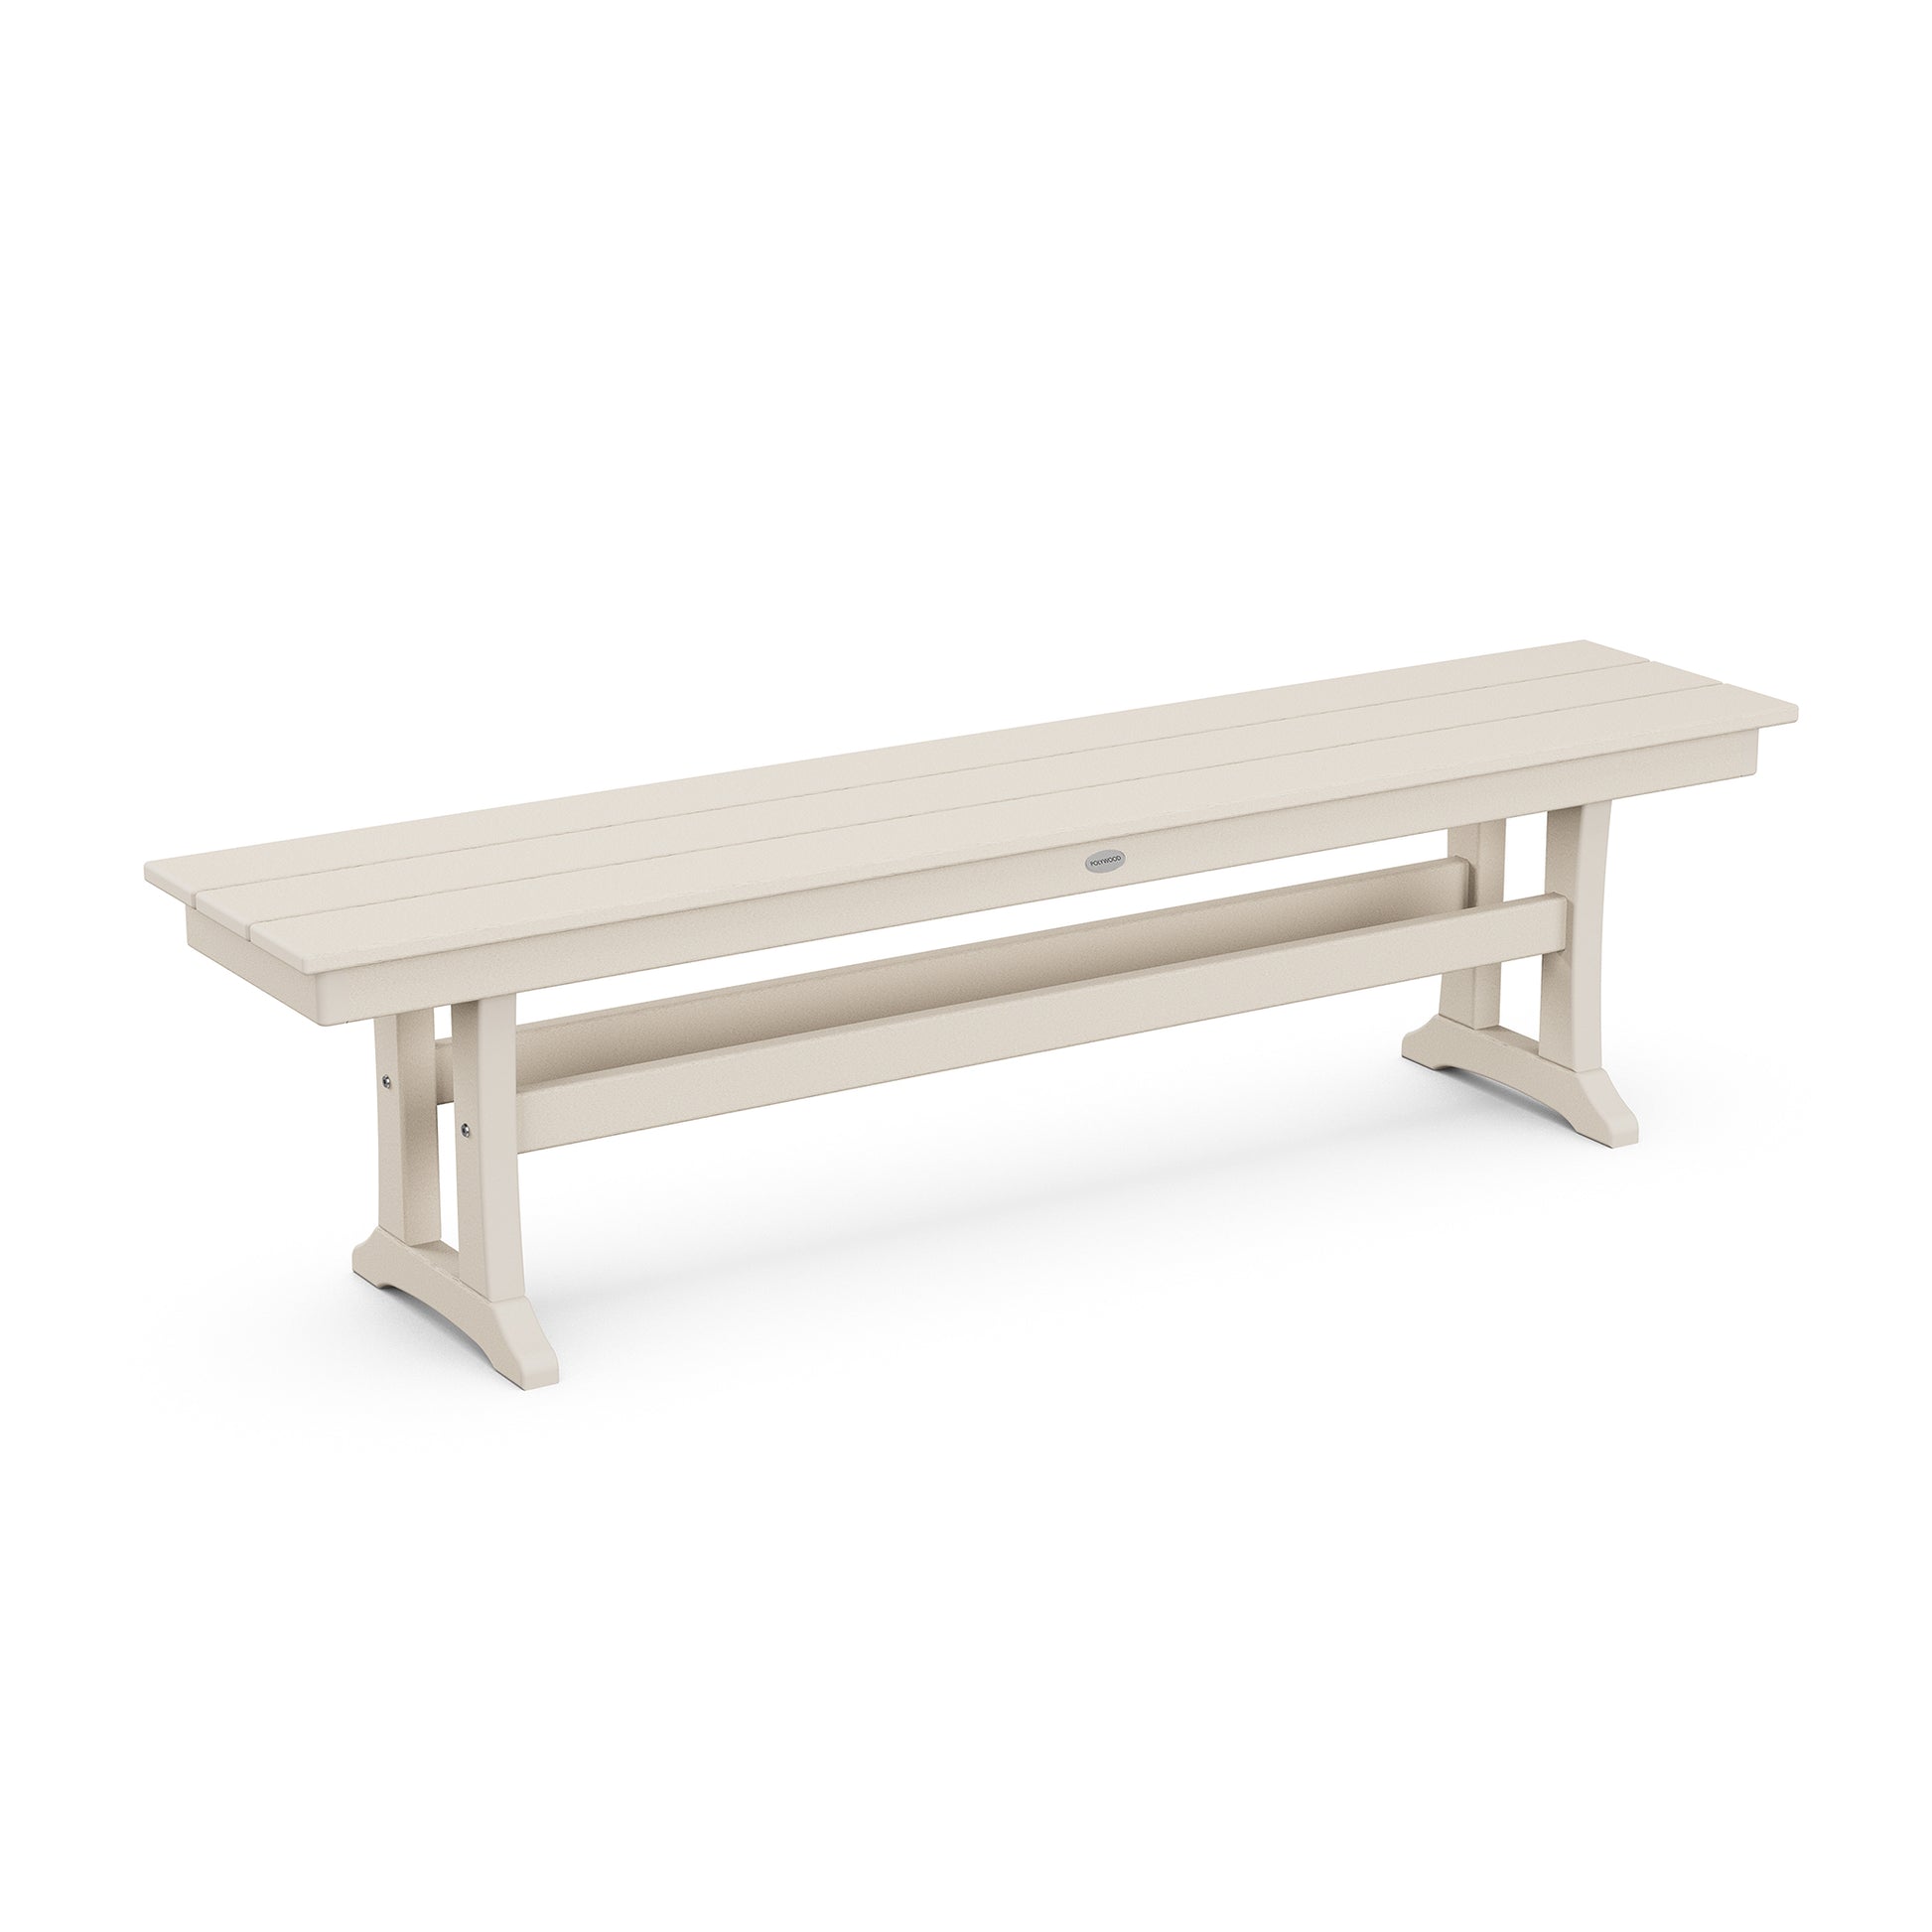 A long, off-white POLYWOOD Farmhouse Trestle 65" Bench outdoor bench with a slatted seat and a lower supportive rail, set against a plain white background.